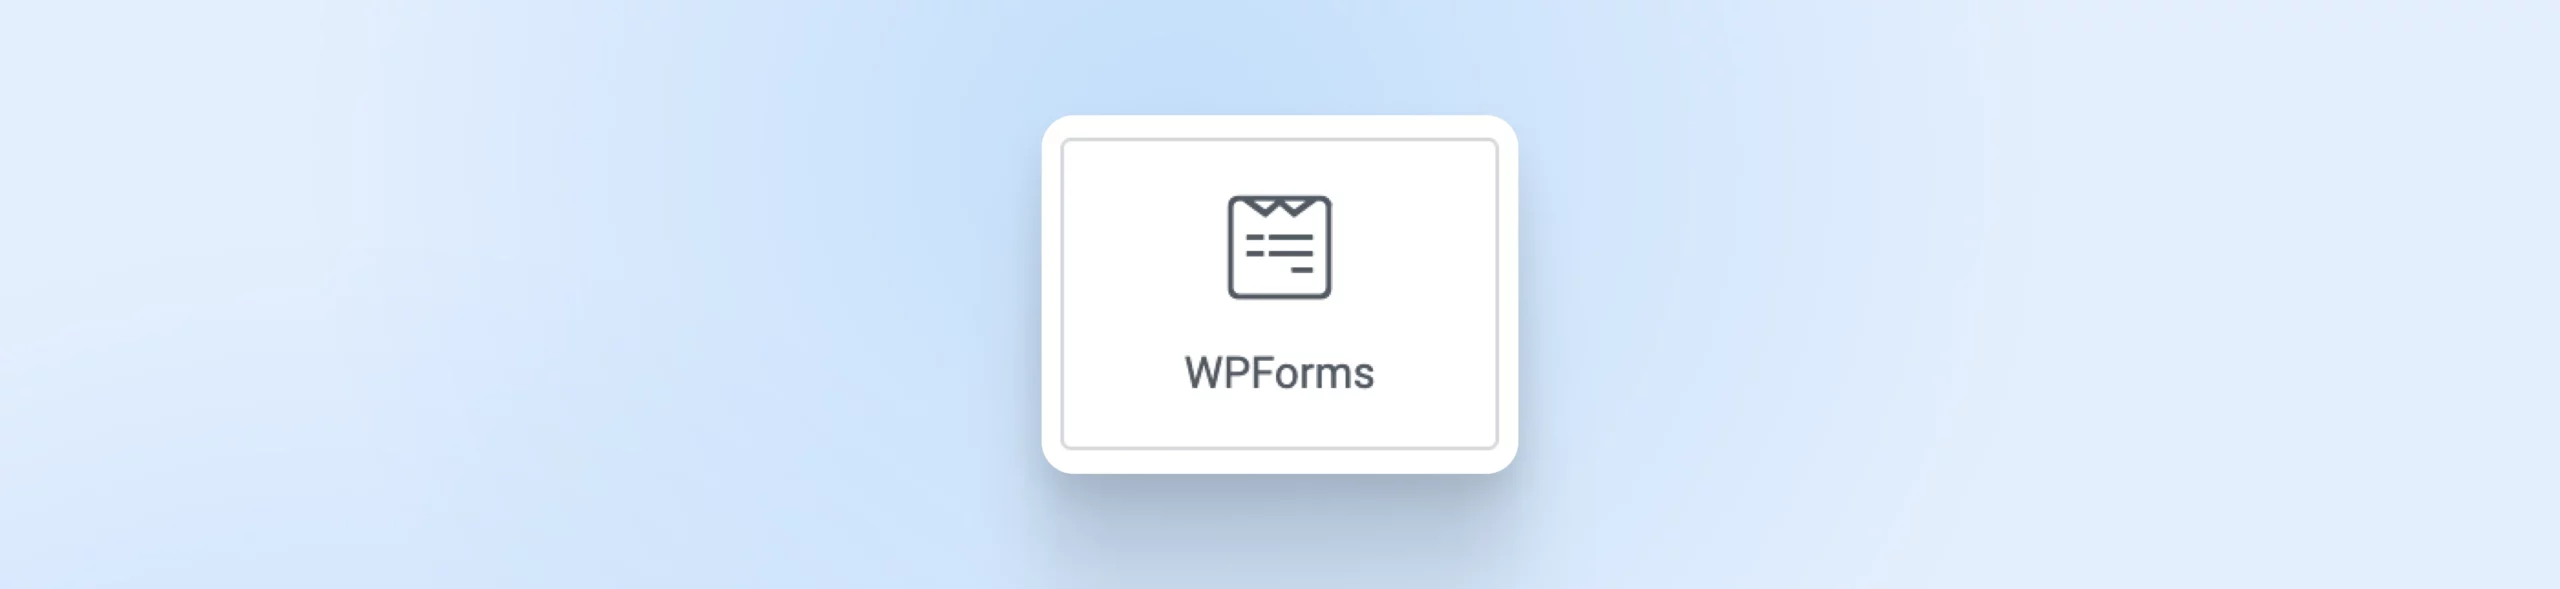 Screenshot of button "WPForms" from the sidebar to include a contact form on your landing page.